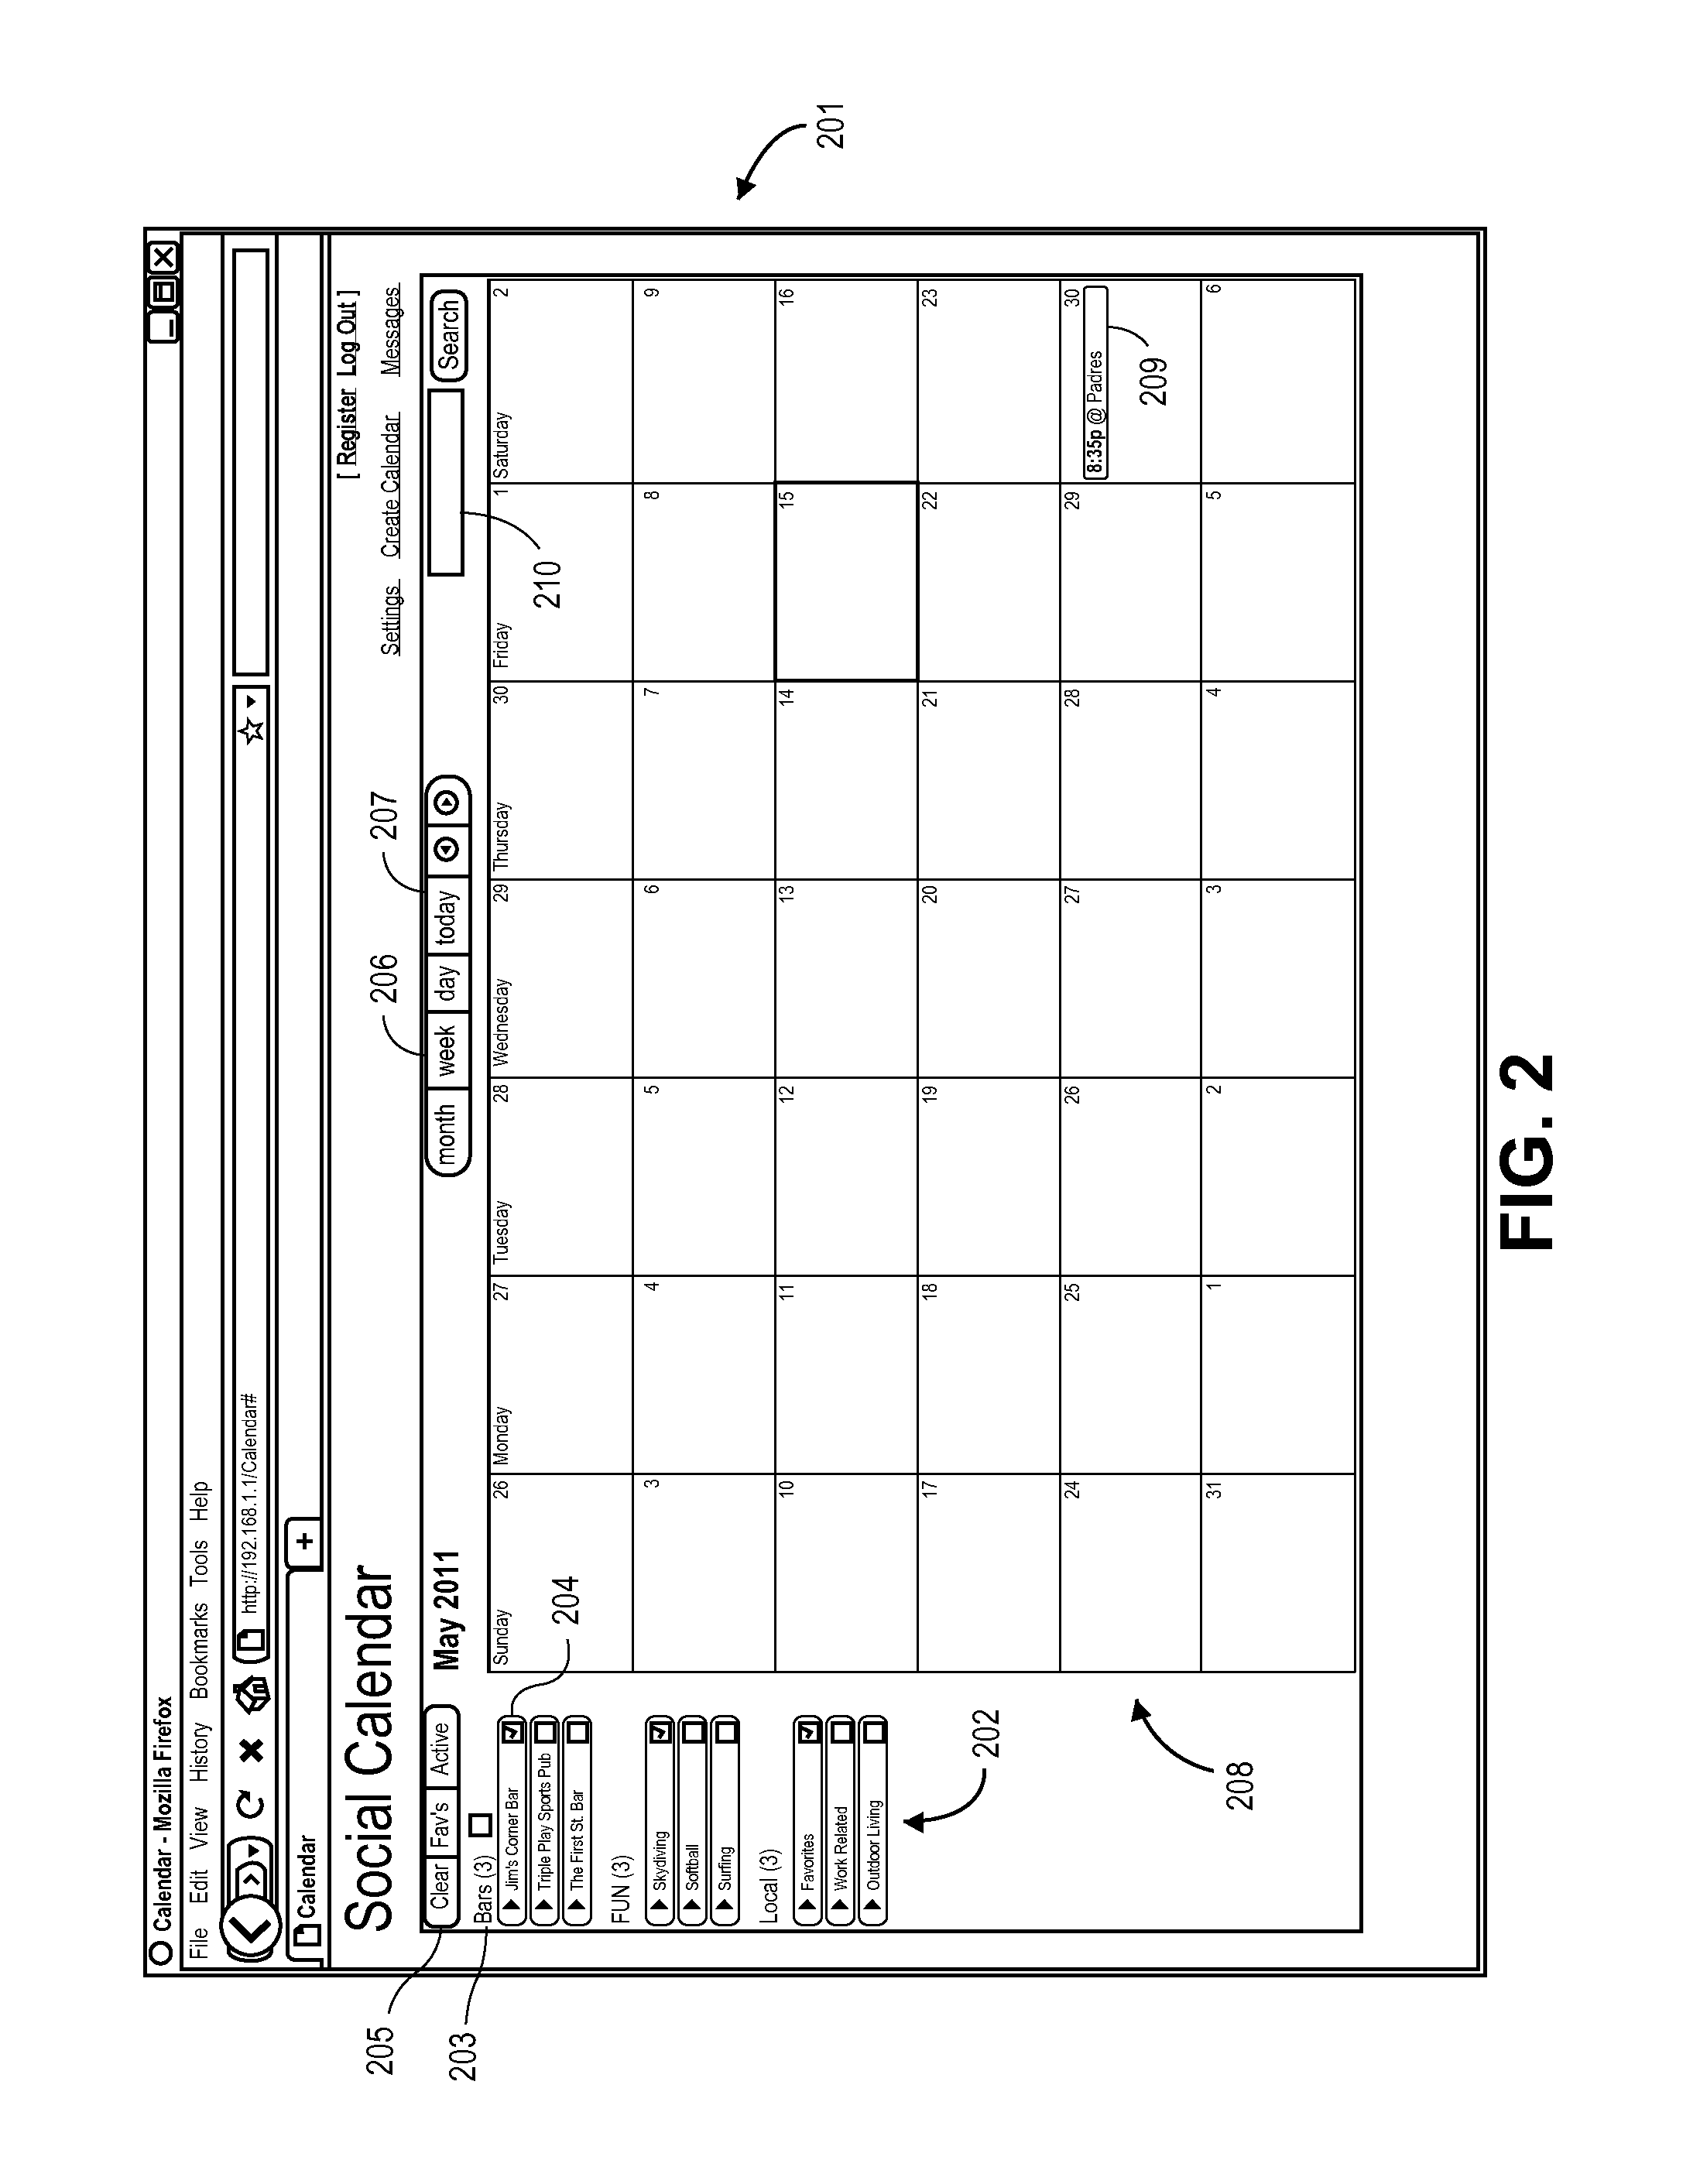 Systems and methods for managing event-related information